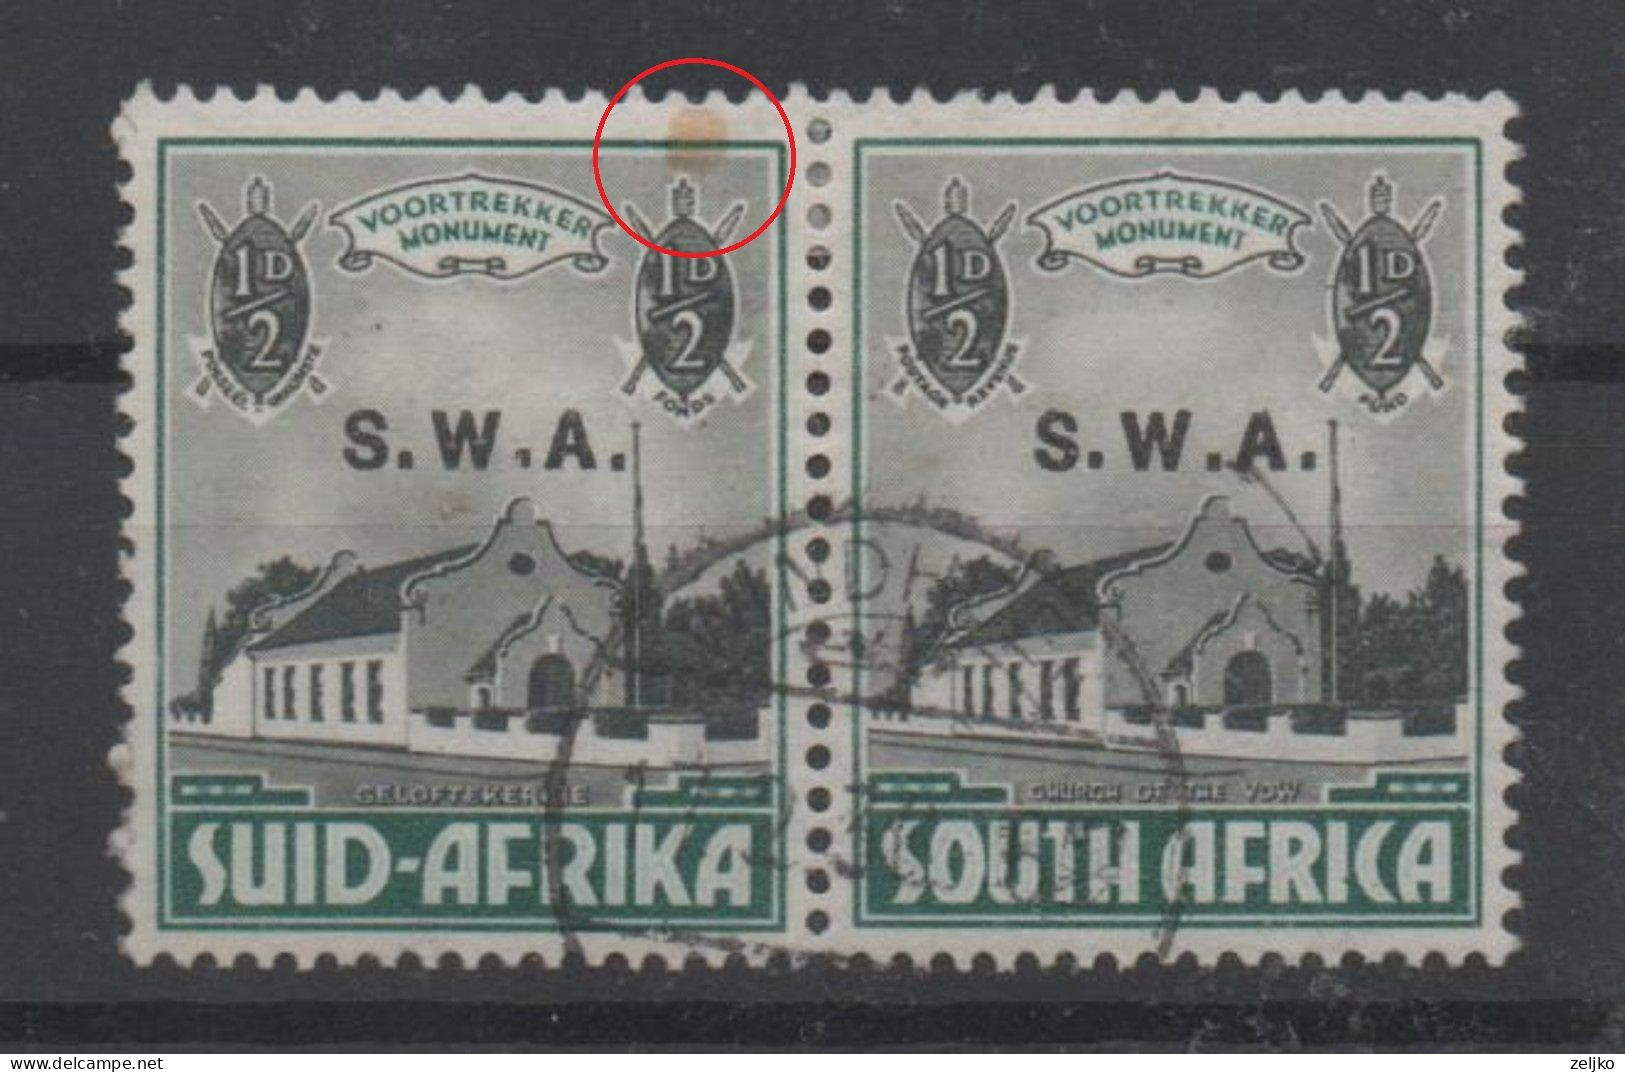 South West Africa, Used, 1935, Michel Pair 172 - 173 - Africa Del Sud-Ovest (1923-1990)